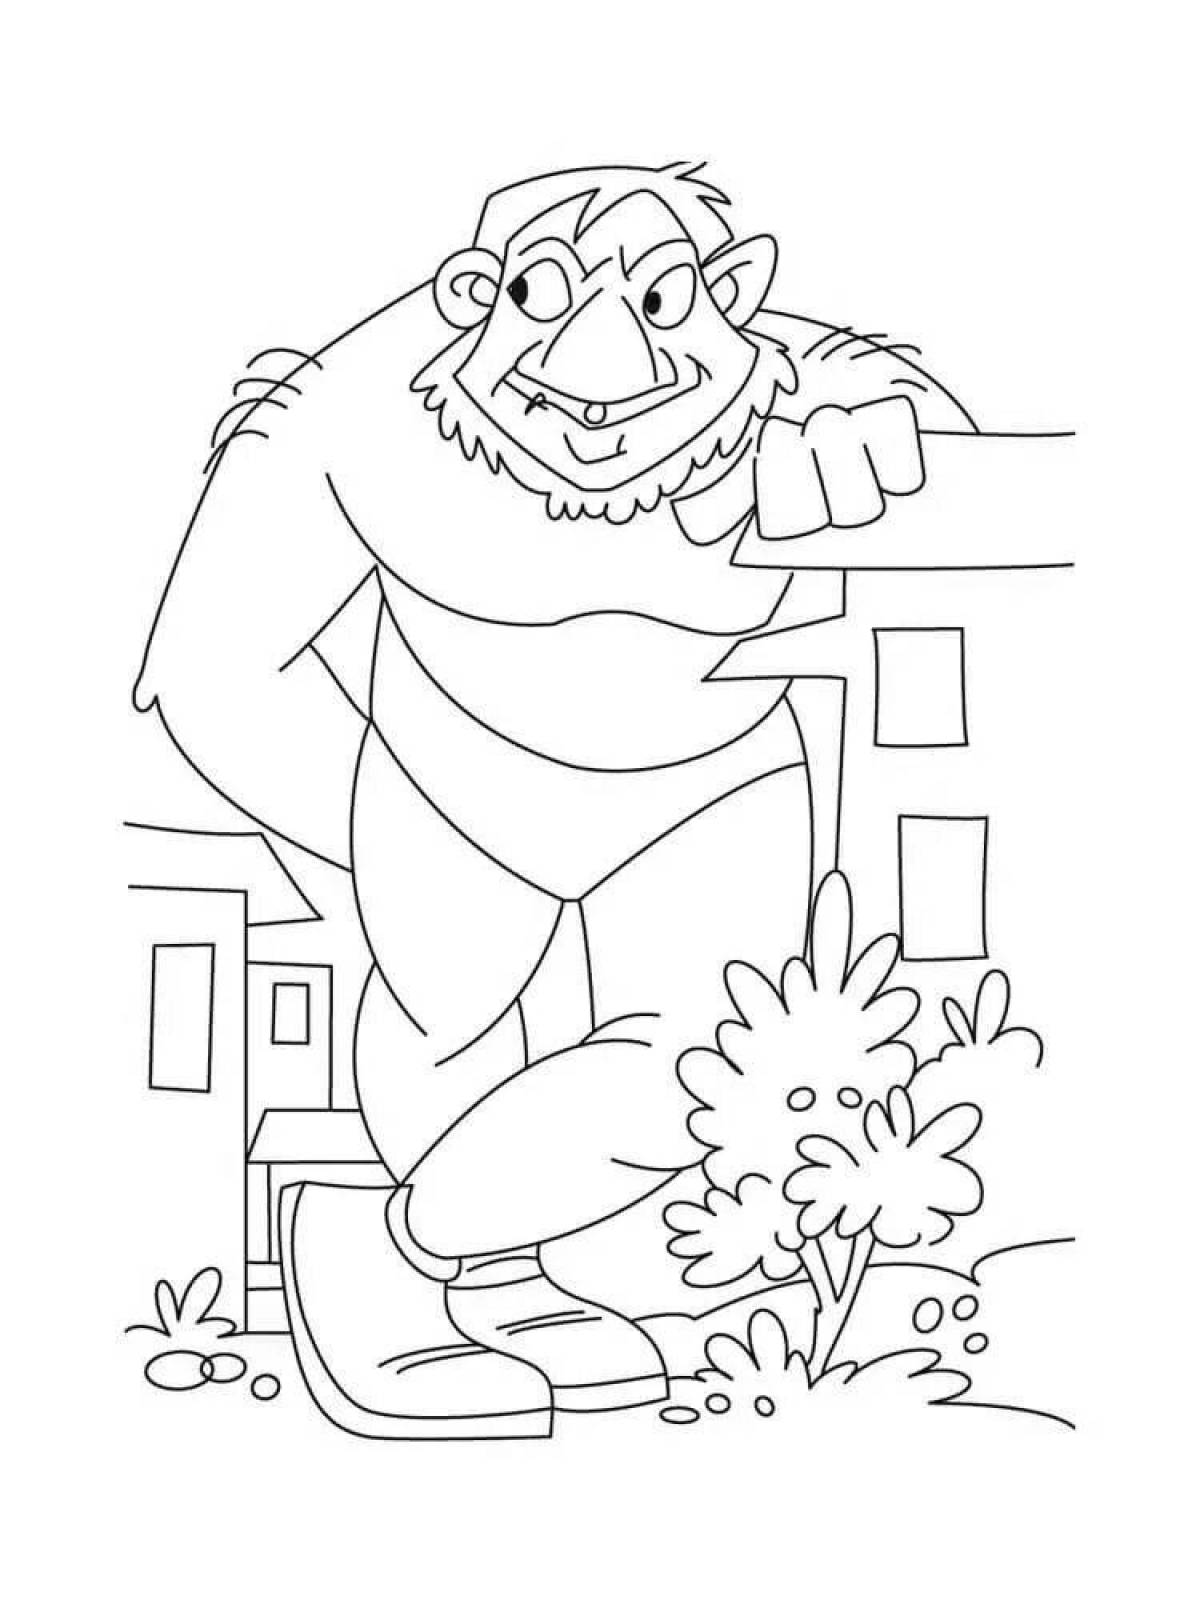 Luxury coloring page giant